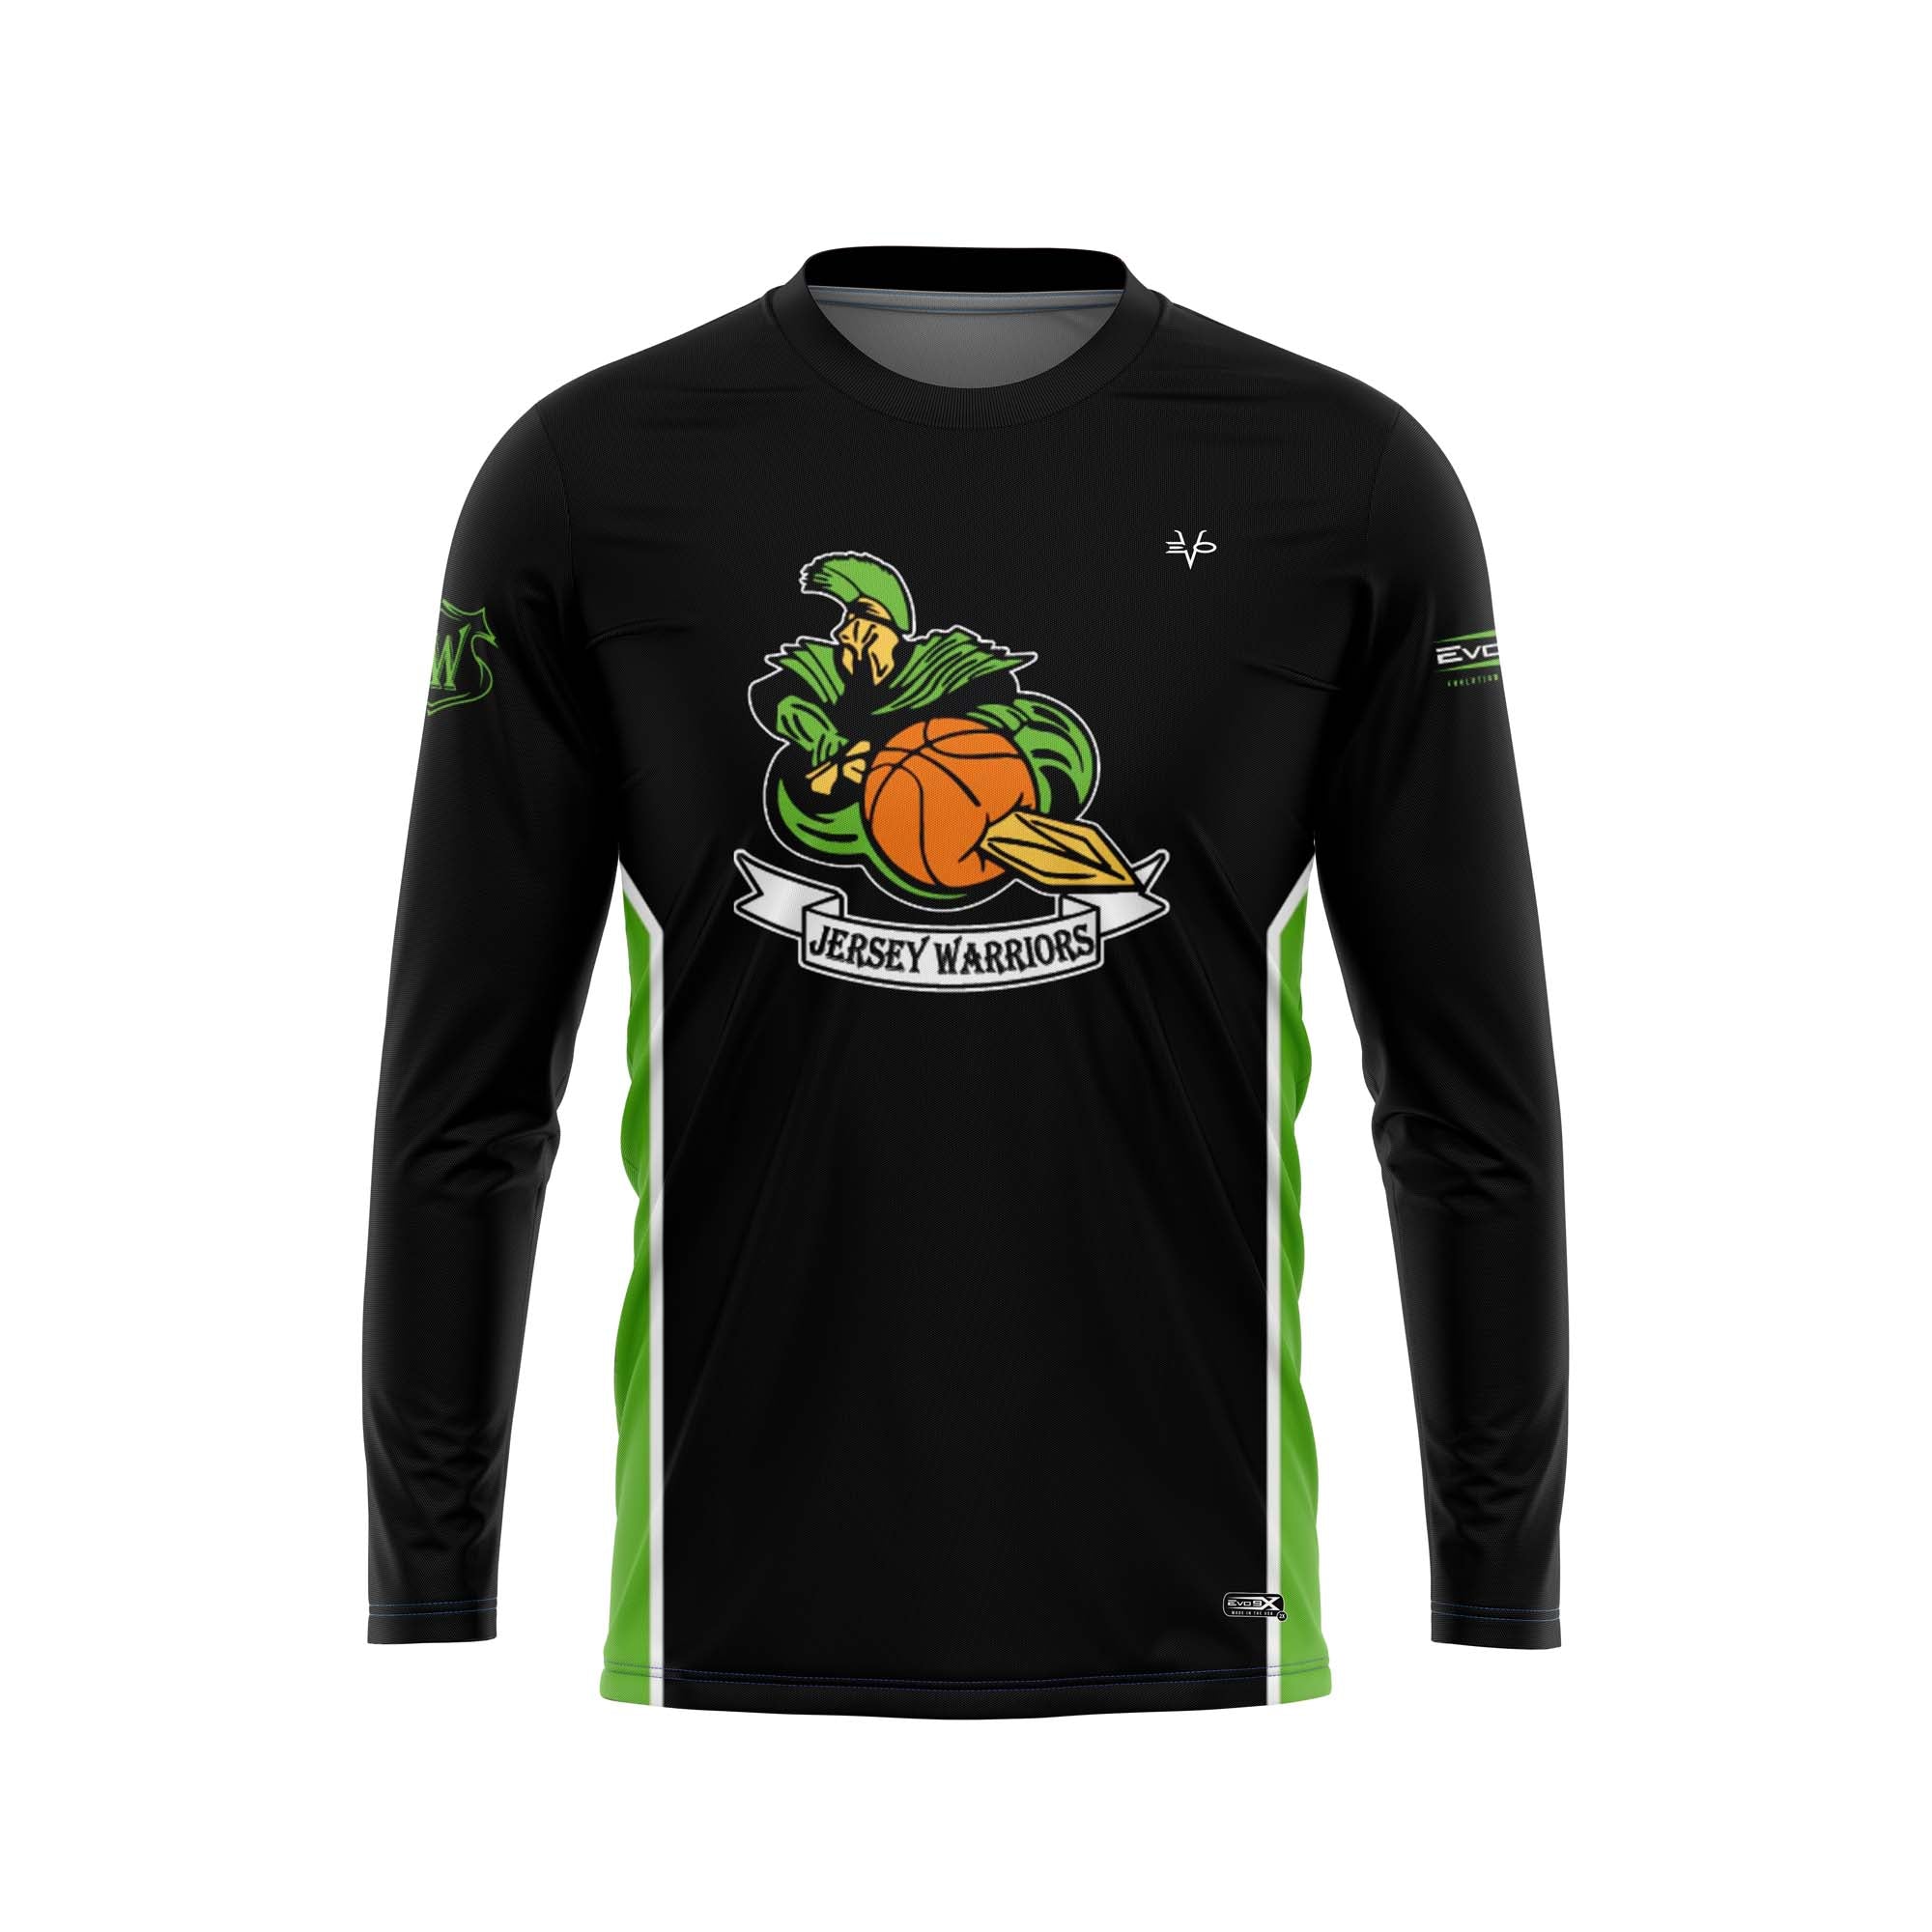 JERSEY WARRIORS Basketball Sublimated Long Sleeve Jersey